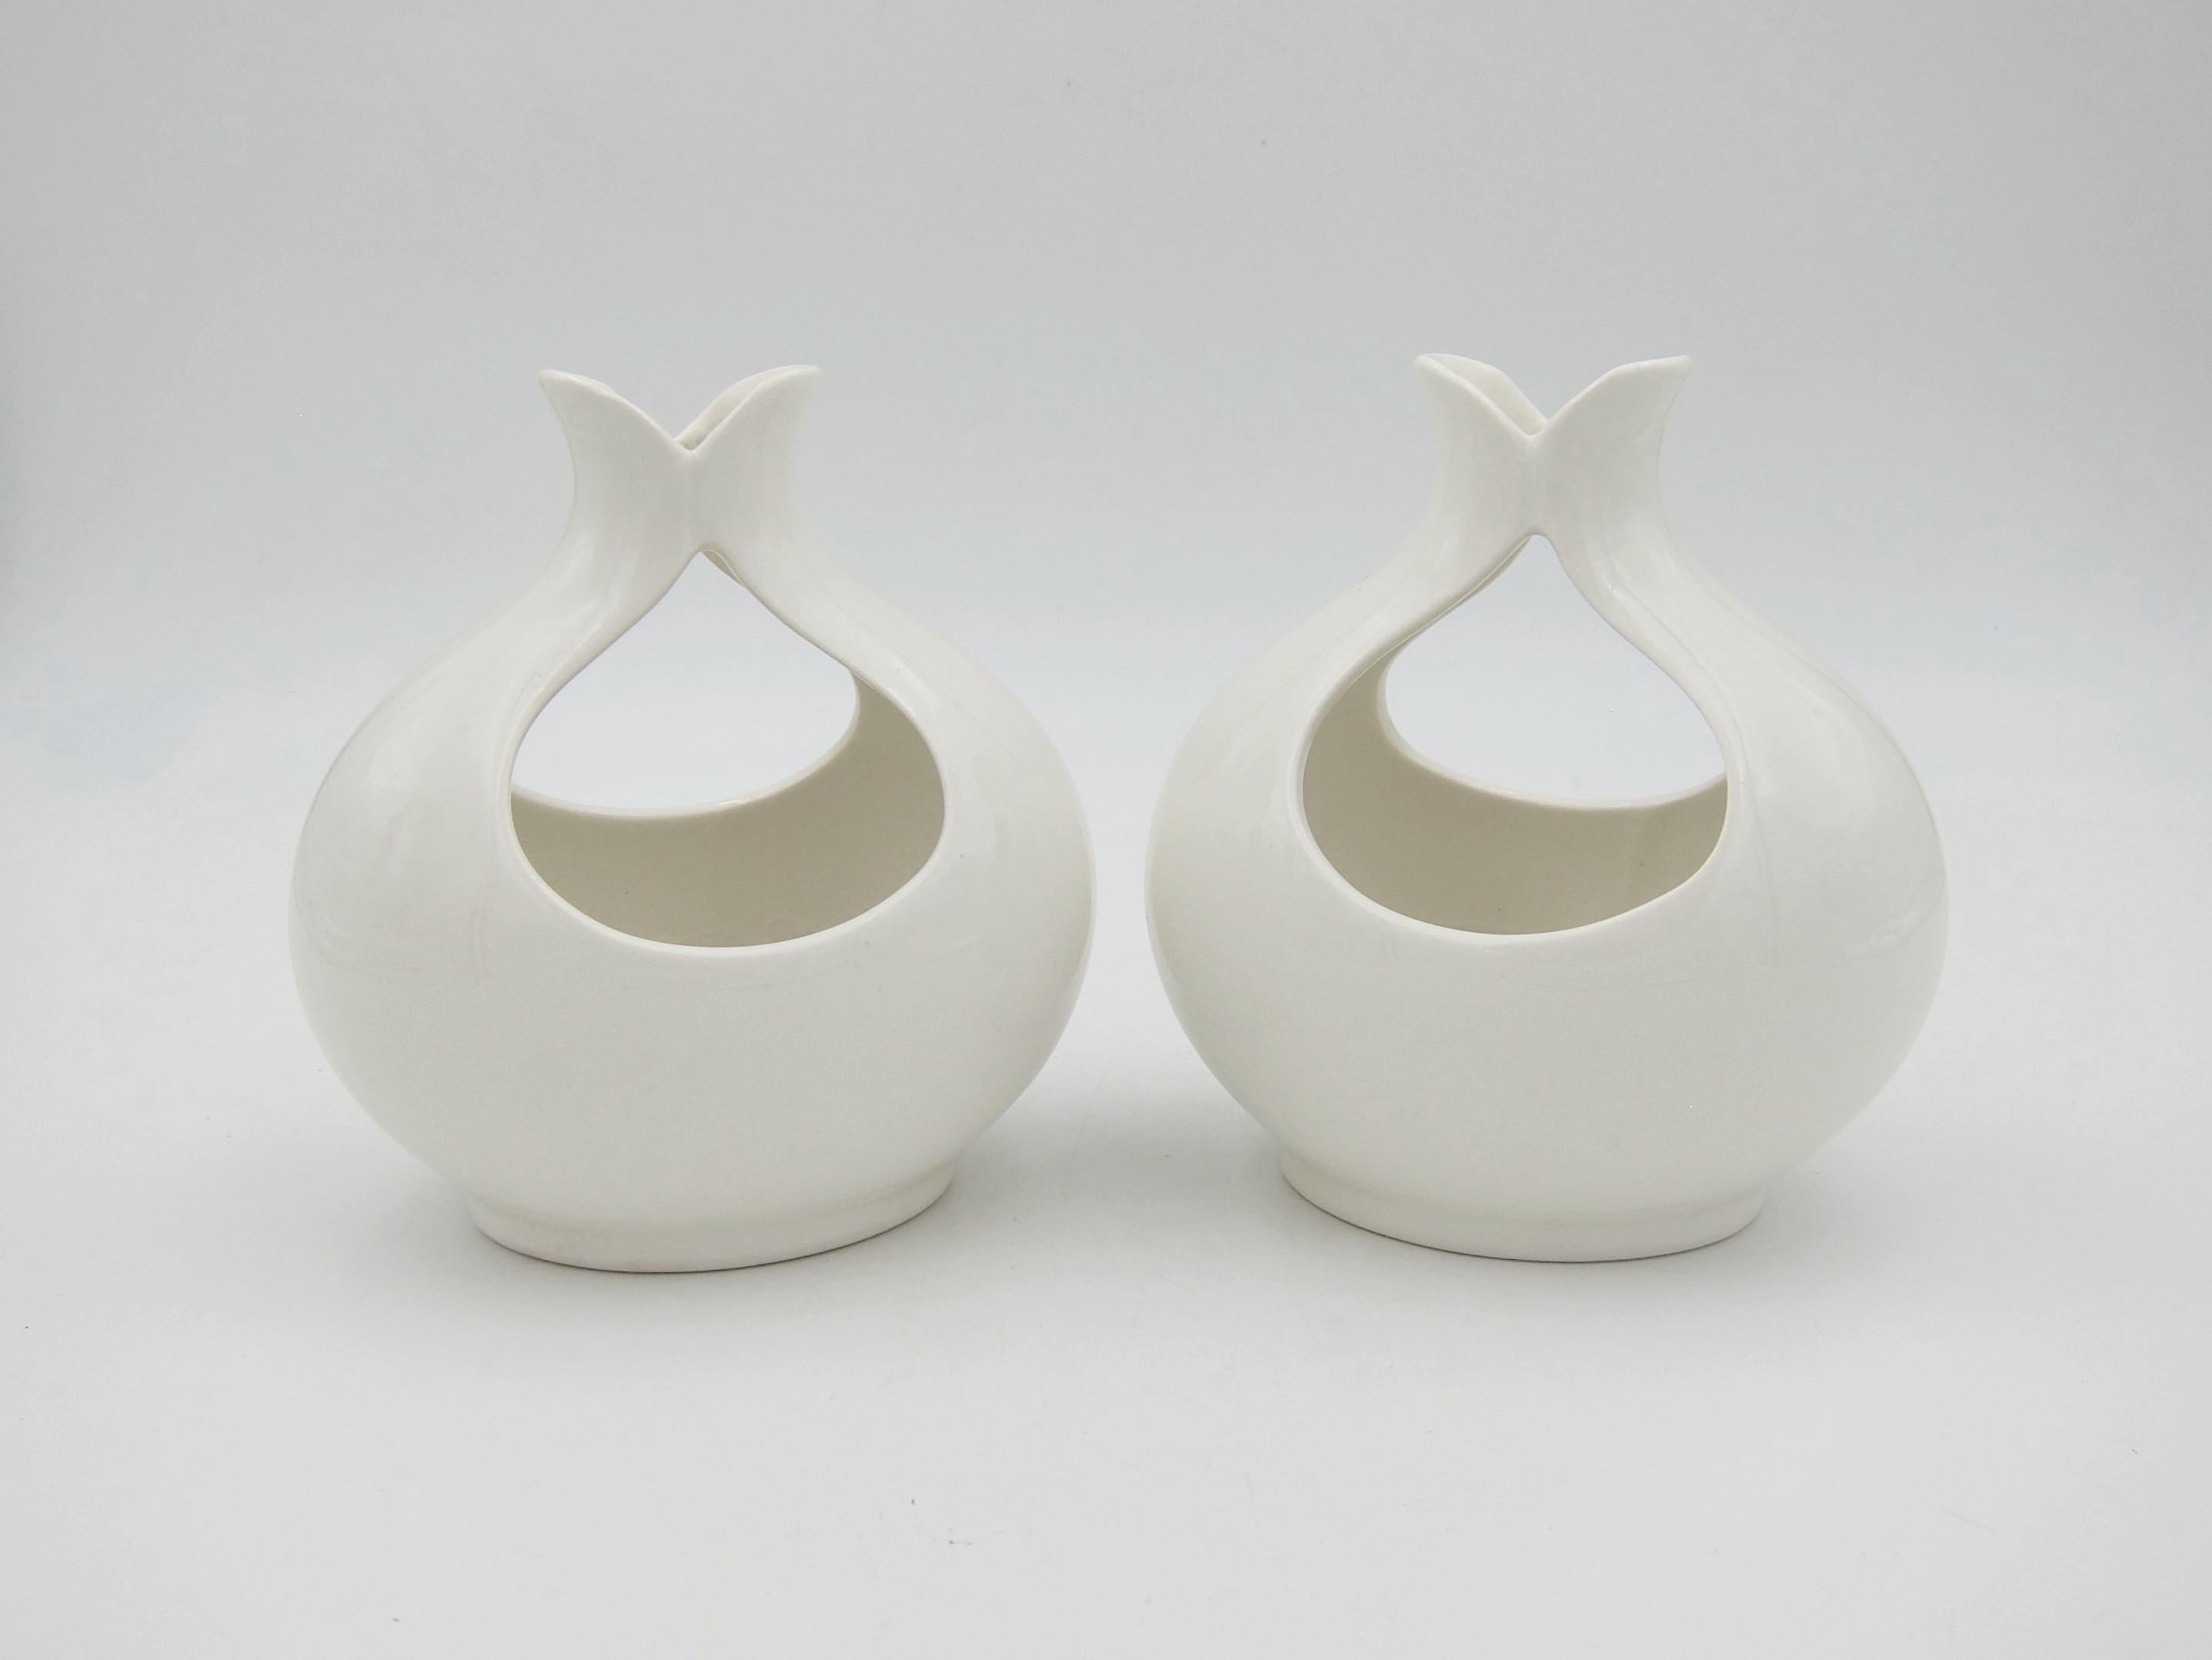 American Eva Zeisel Tomorrow's Classic White Mid-Century Candle Holders for Hallcraft